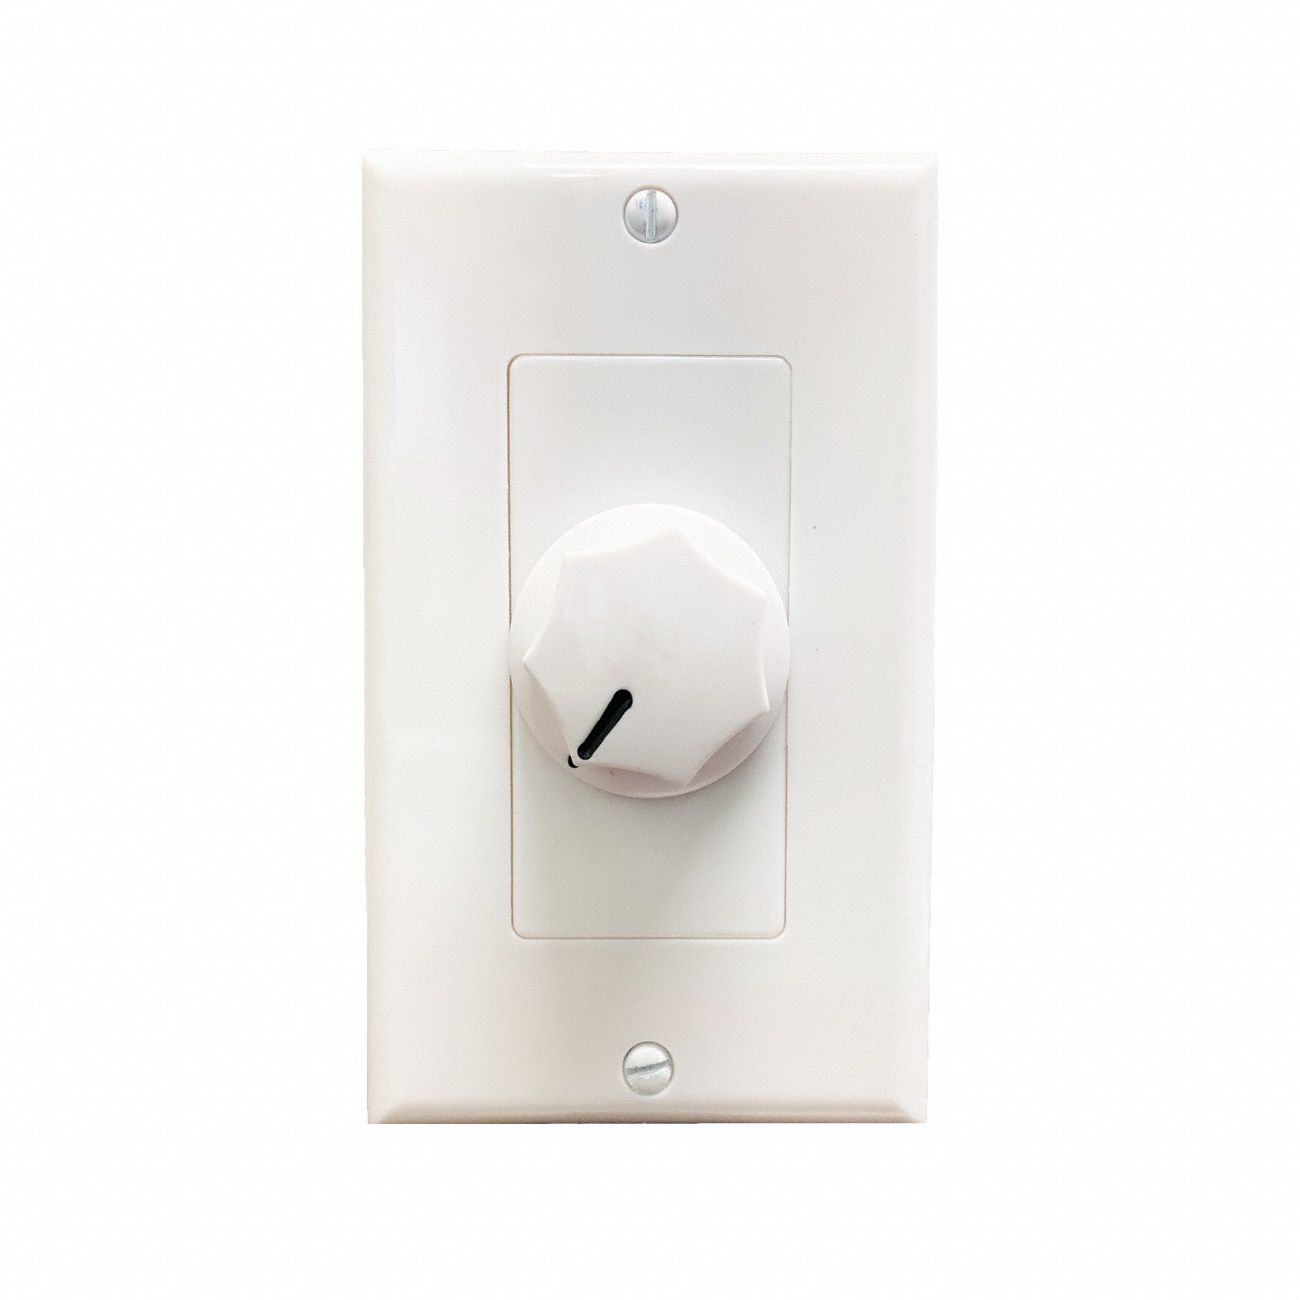 Mono Volume Control: ABS Plastic, White, 1 in Dp, 4 1/2 in Ht, 2 1/4 in Wd